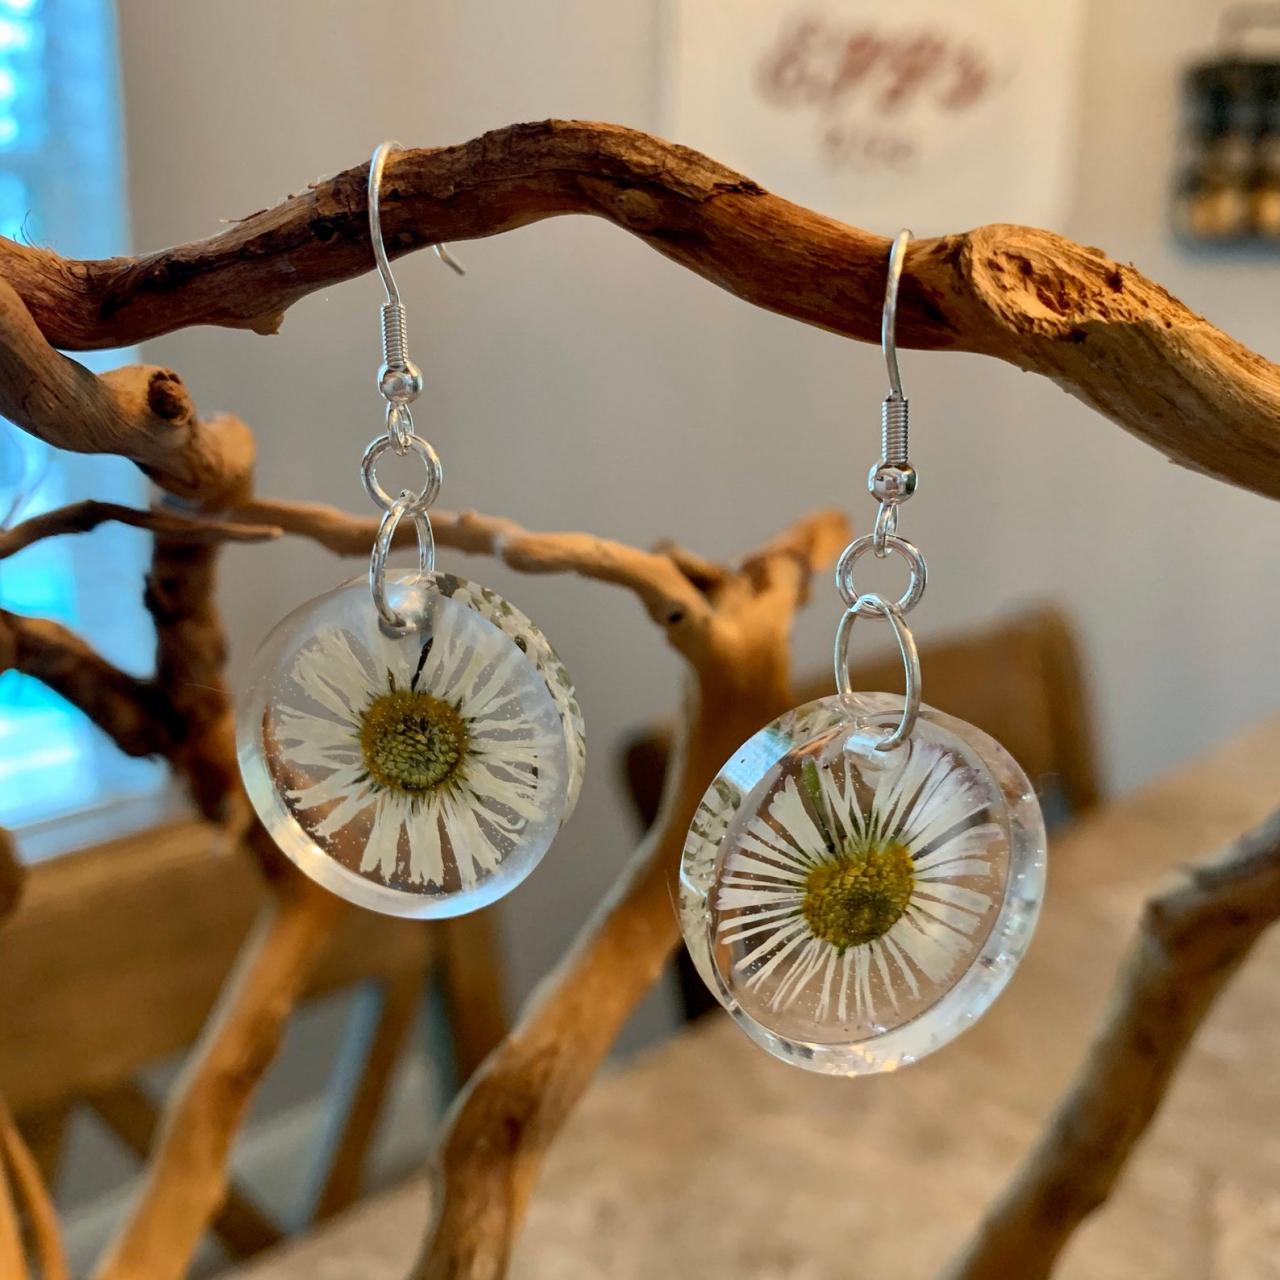 Pressed Daisy Flower Earrings, Resin Flower Jewelry, Unique Gift For Grad, Preserved Flowers, Boho, Minimalist Jewelry Gifts, Nature Gift,